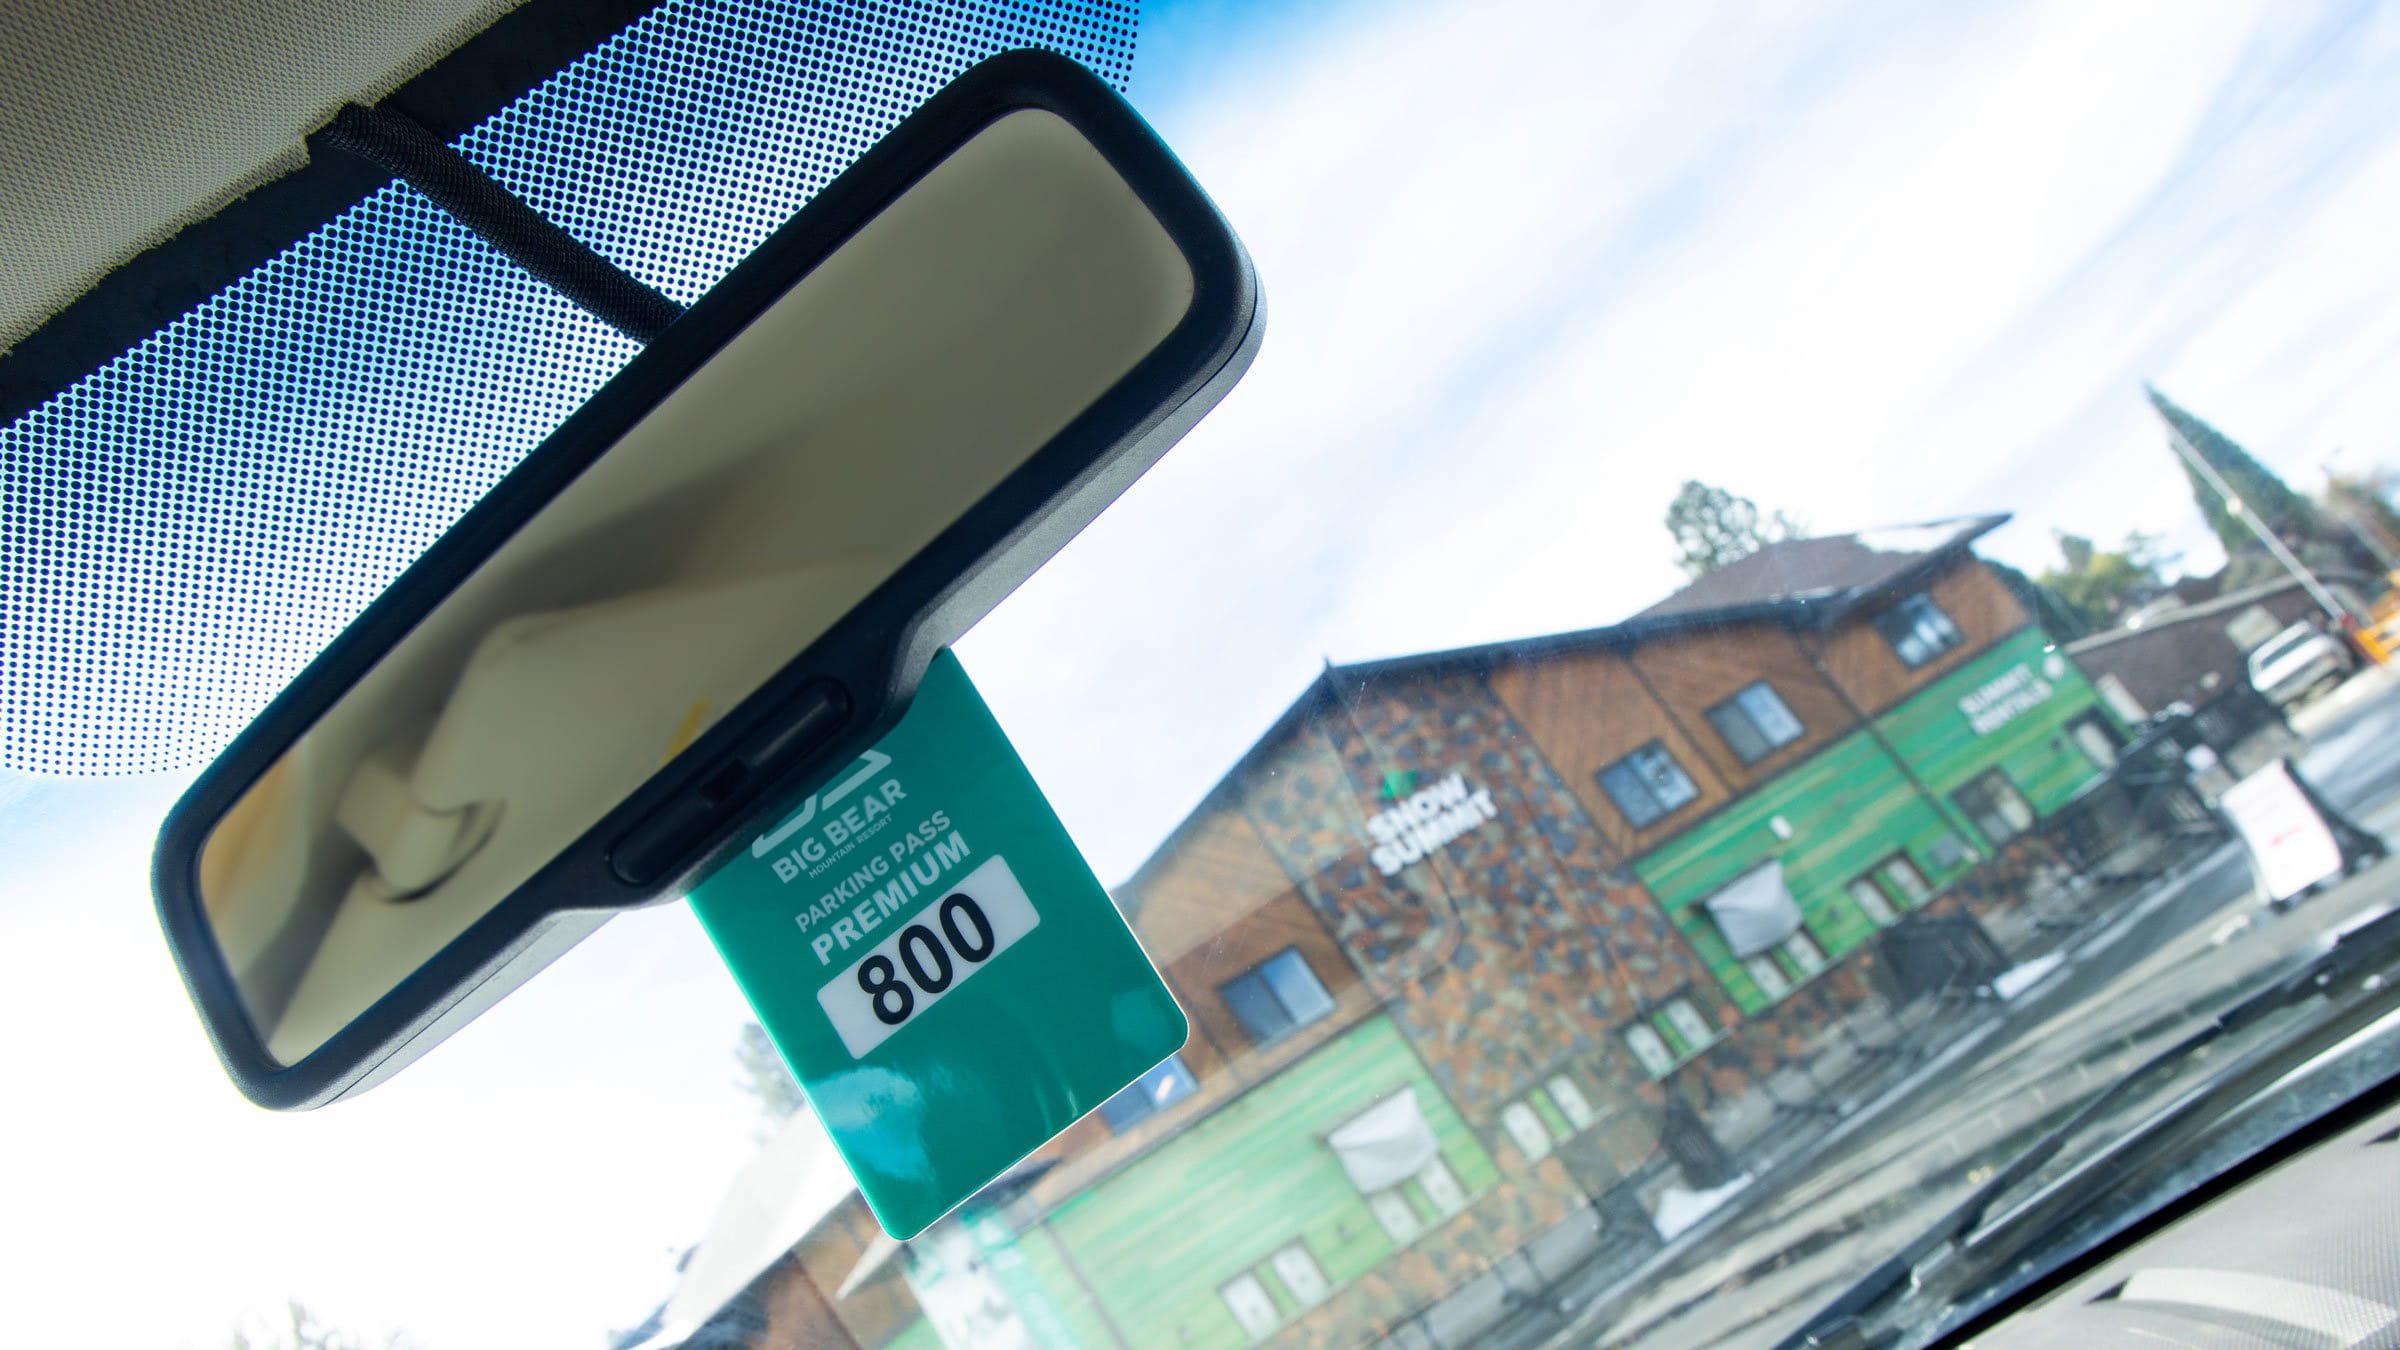 green parking pass hanging from a car, snow summit building in the background